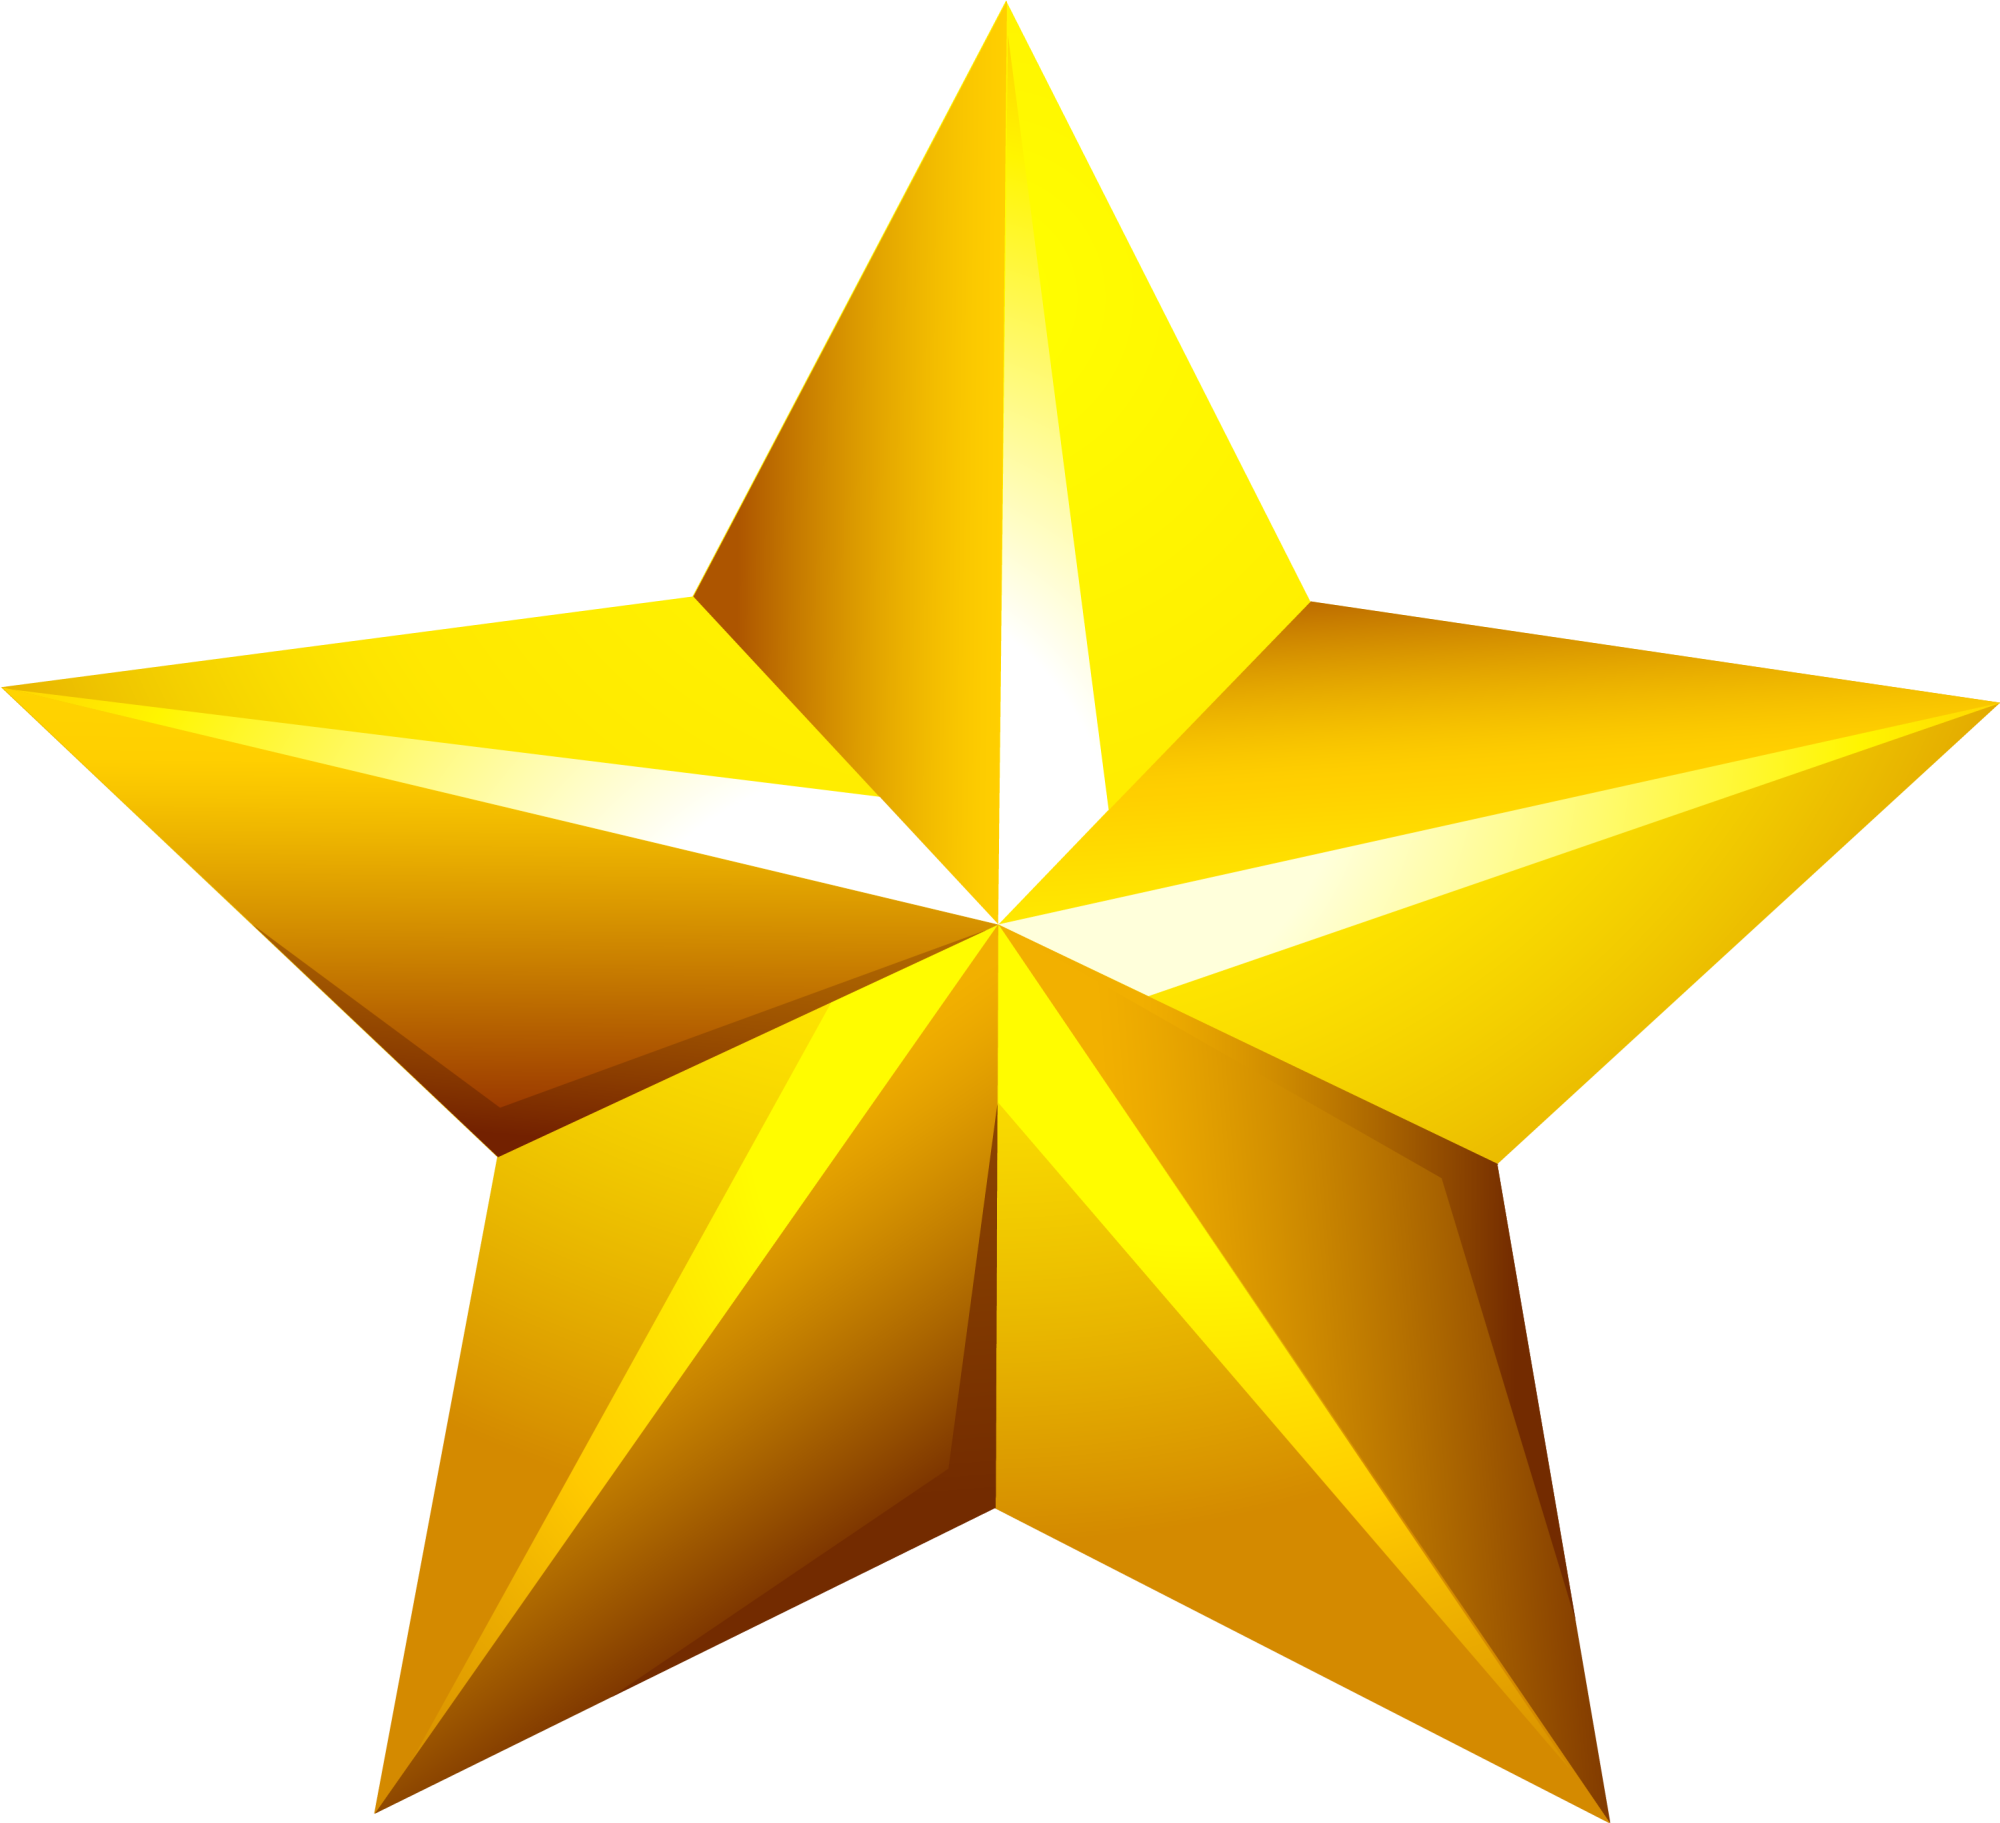 Abstract Star Gold PNG Image High Quality PNG Image